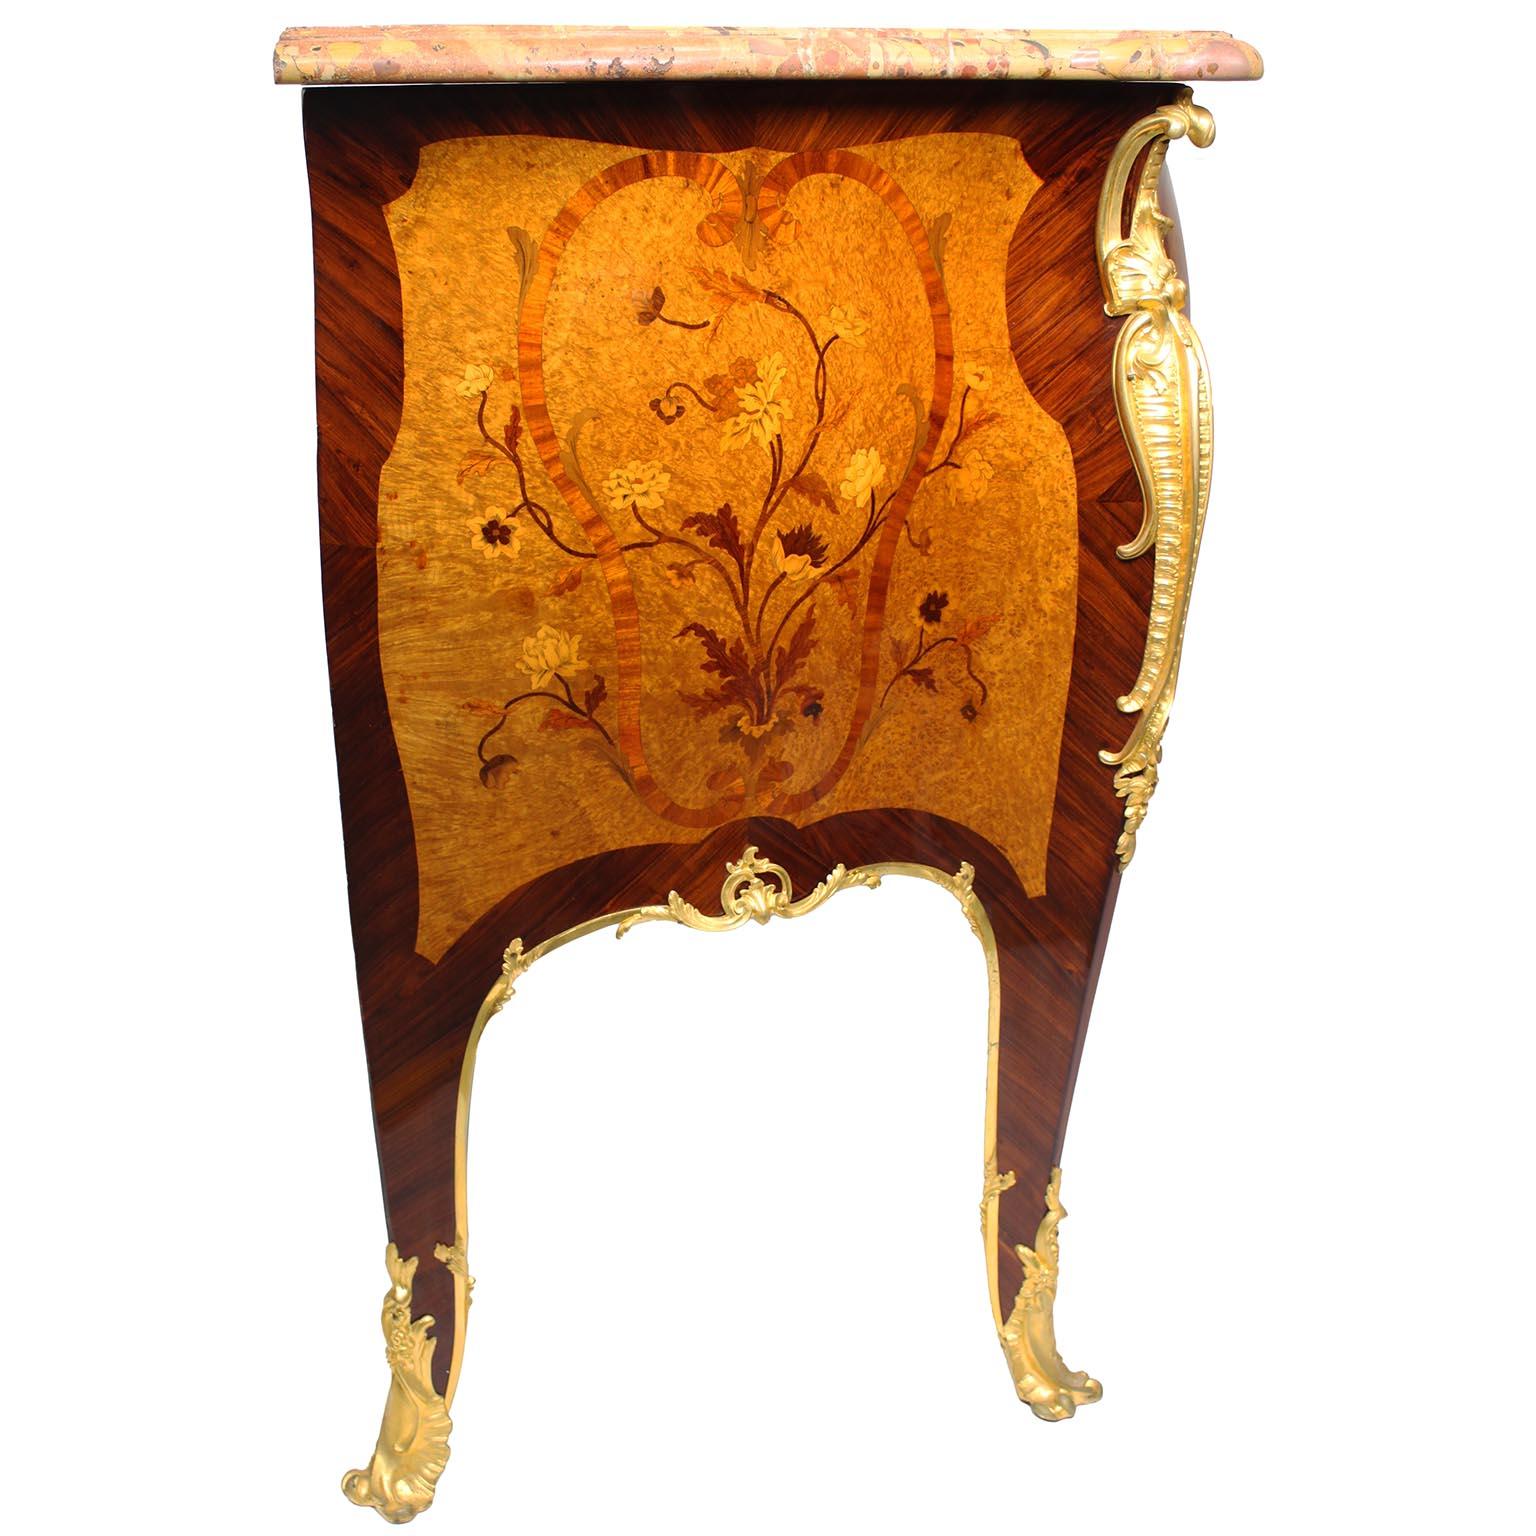 Fine French Louis XV Style Ormolu-Mounted Bombe Commode Attr. to François Linke For Sale 7